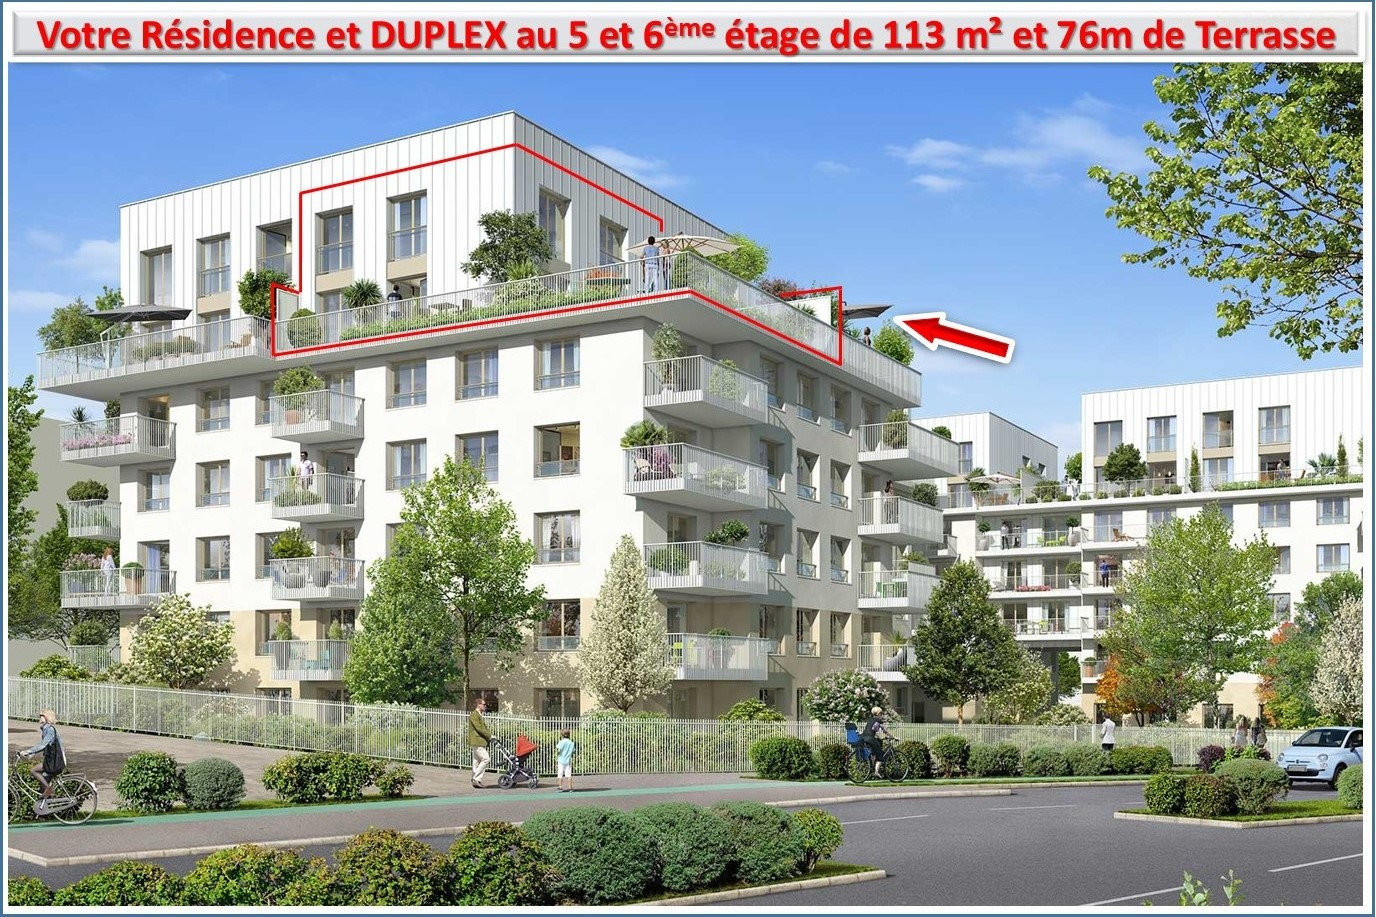 Appartement a louer chatenay-malabry - 5 pièce(s) - 113 m2 - Surfyn